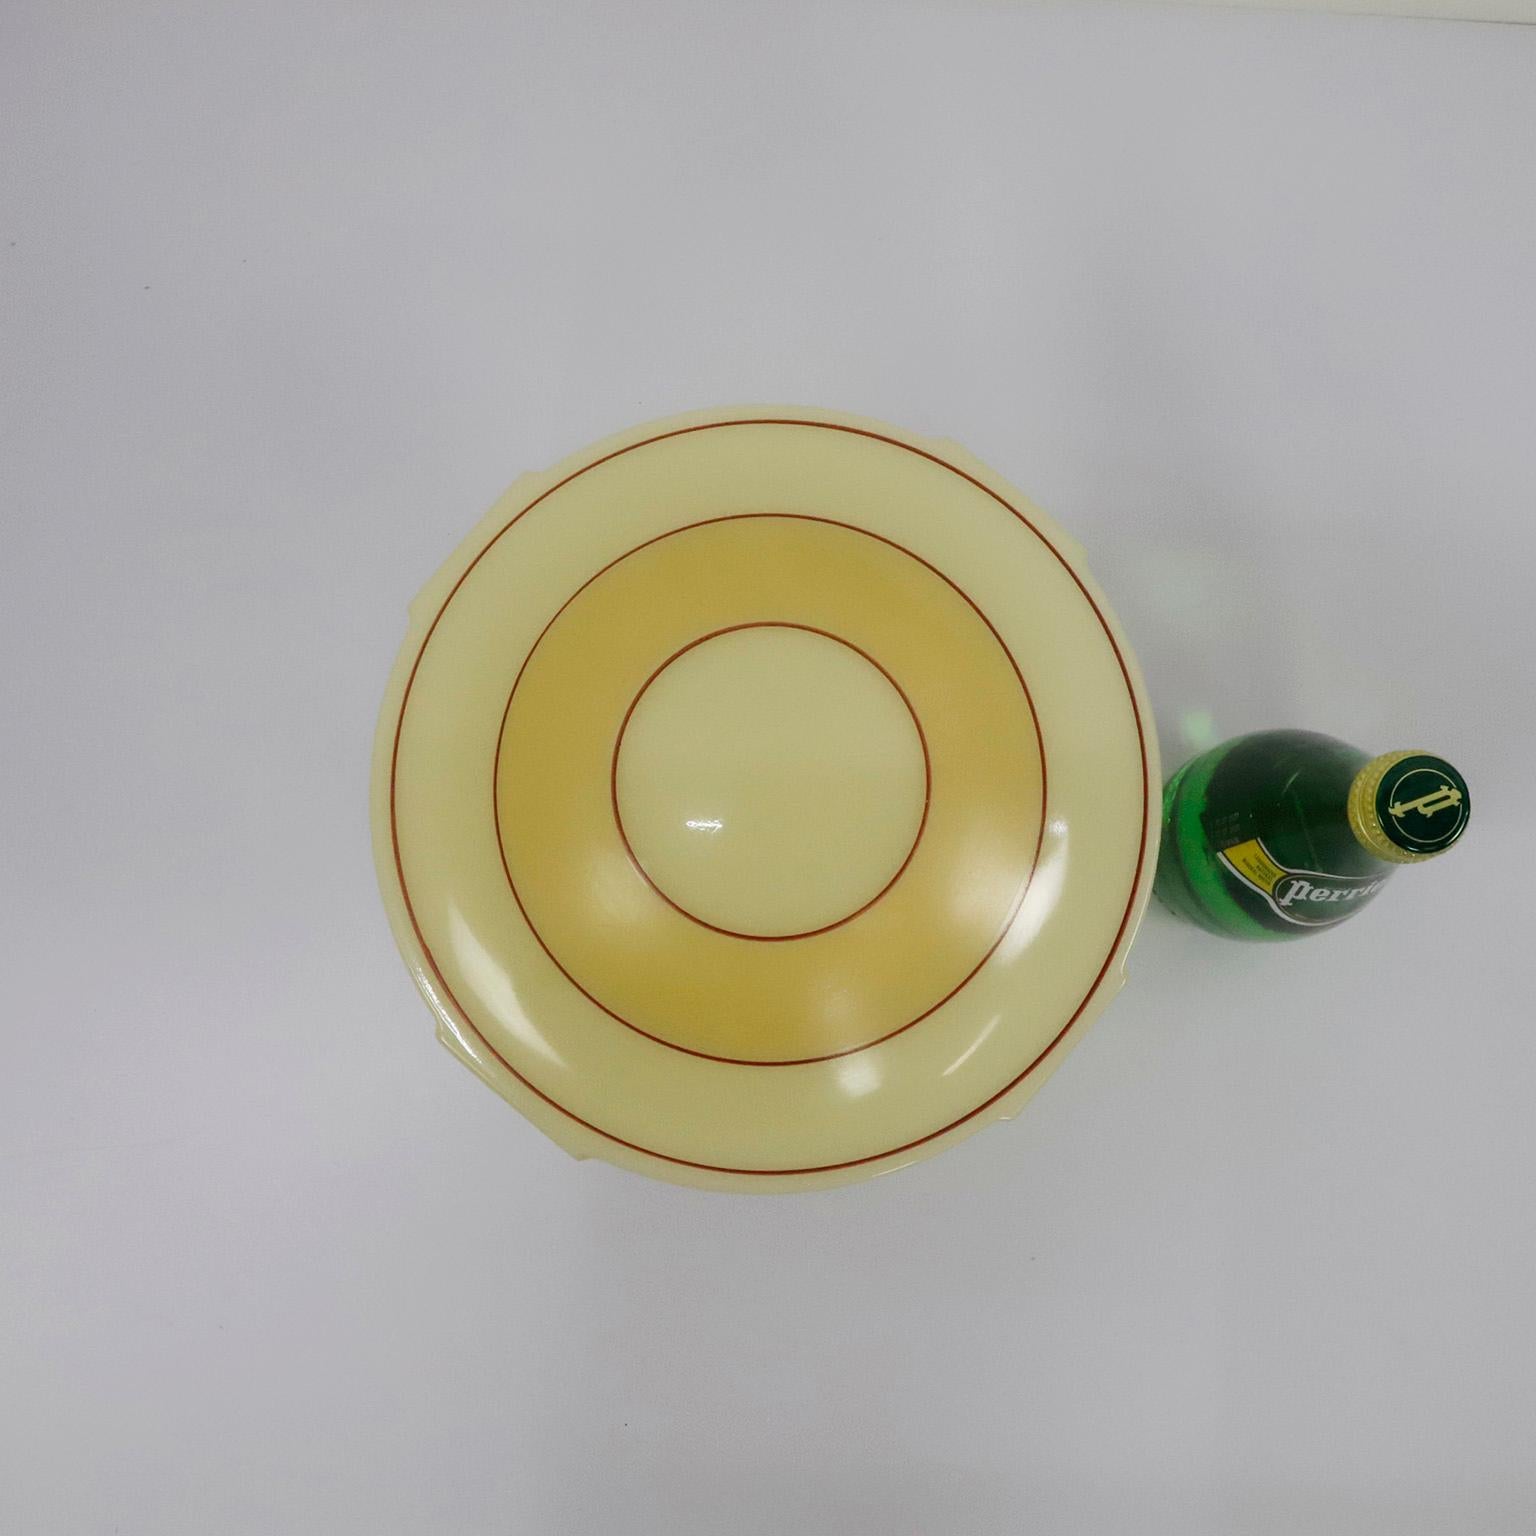 Circa 1930. We offer this Art Deco, pendant light features a ridged milk glass. Excellent vintage conditions.